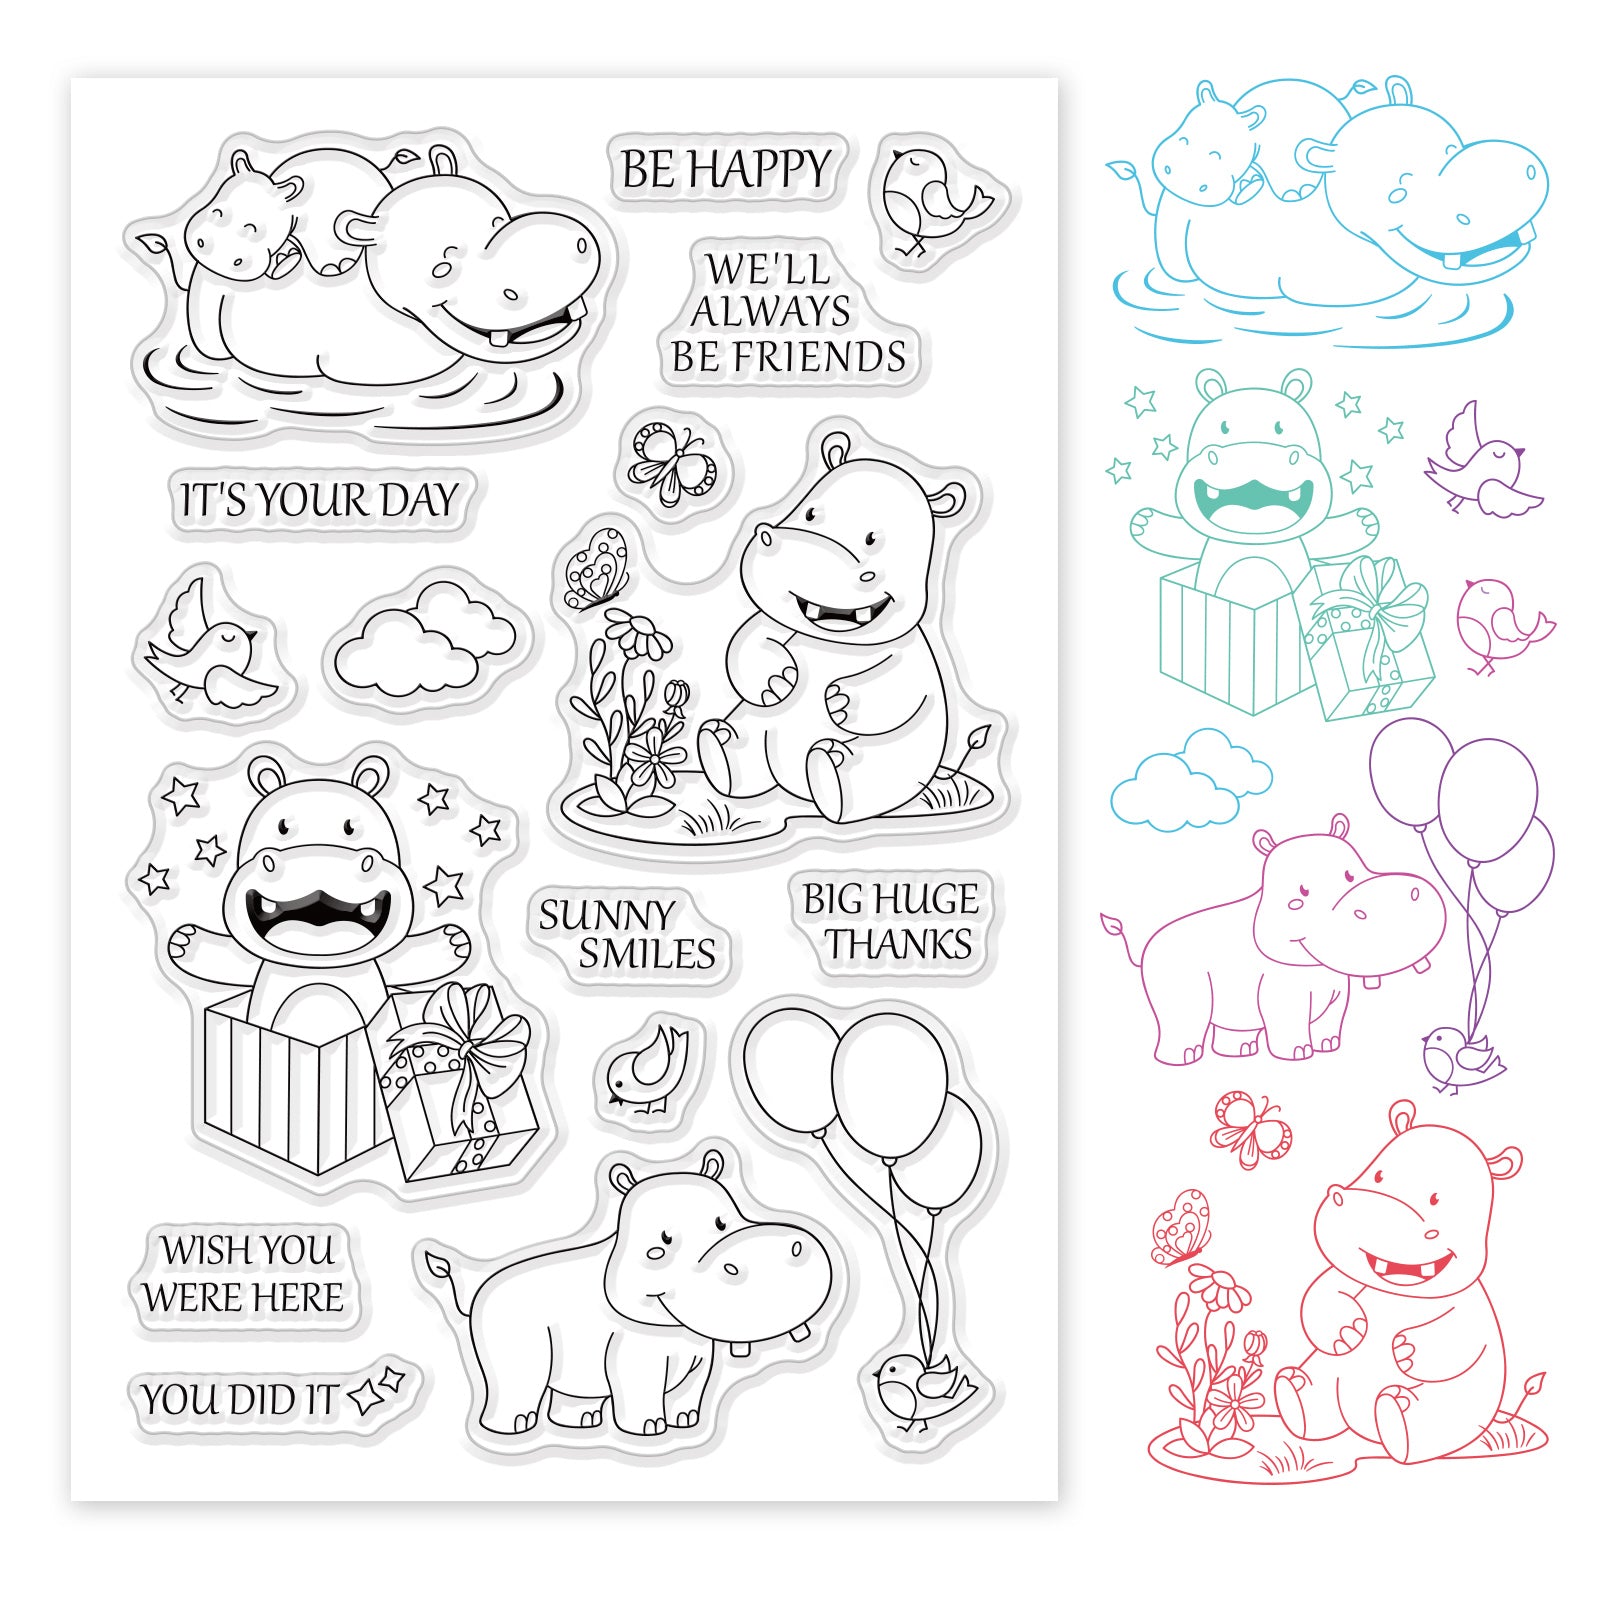 Happy Hippo, Bird, Flowers Clear Silicone Stamp Seal for Card Making Decoration and DIY Scrapbooking